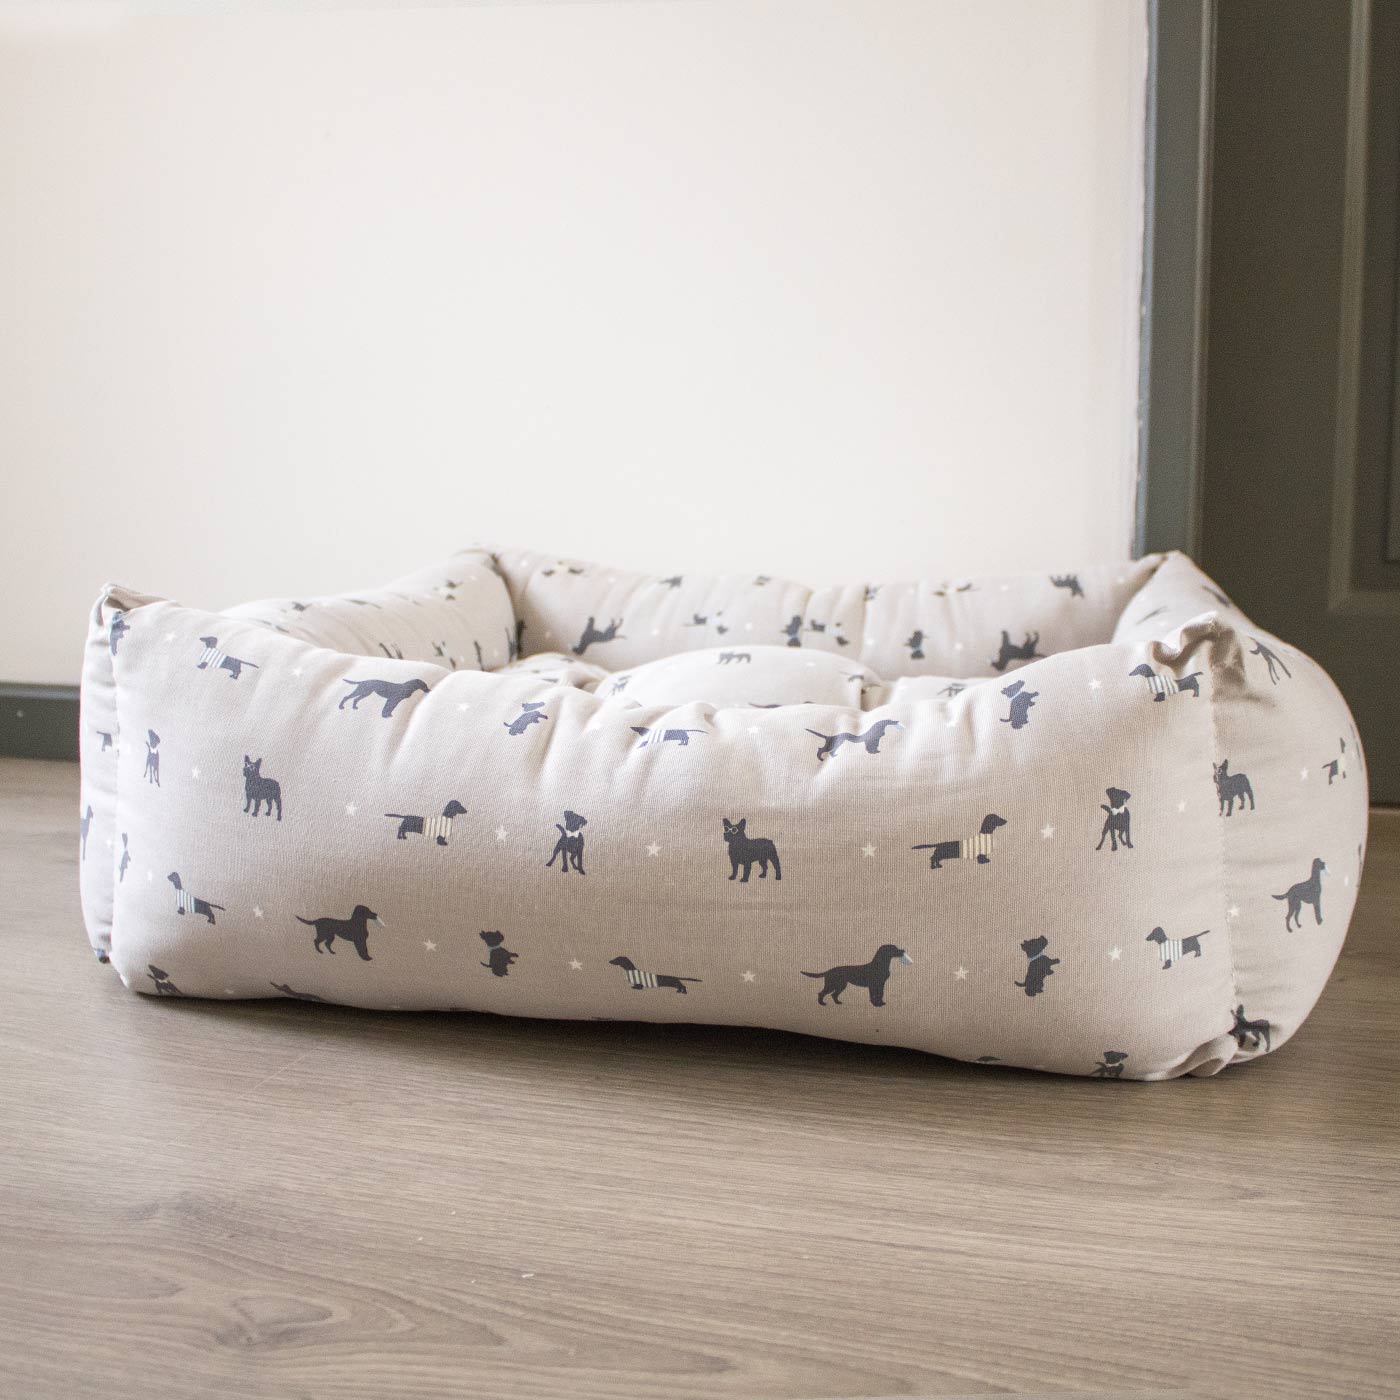 Box Bed For Dogs - Cosmopolitan Dog